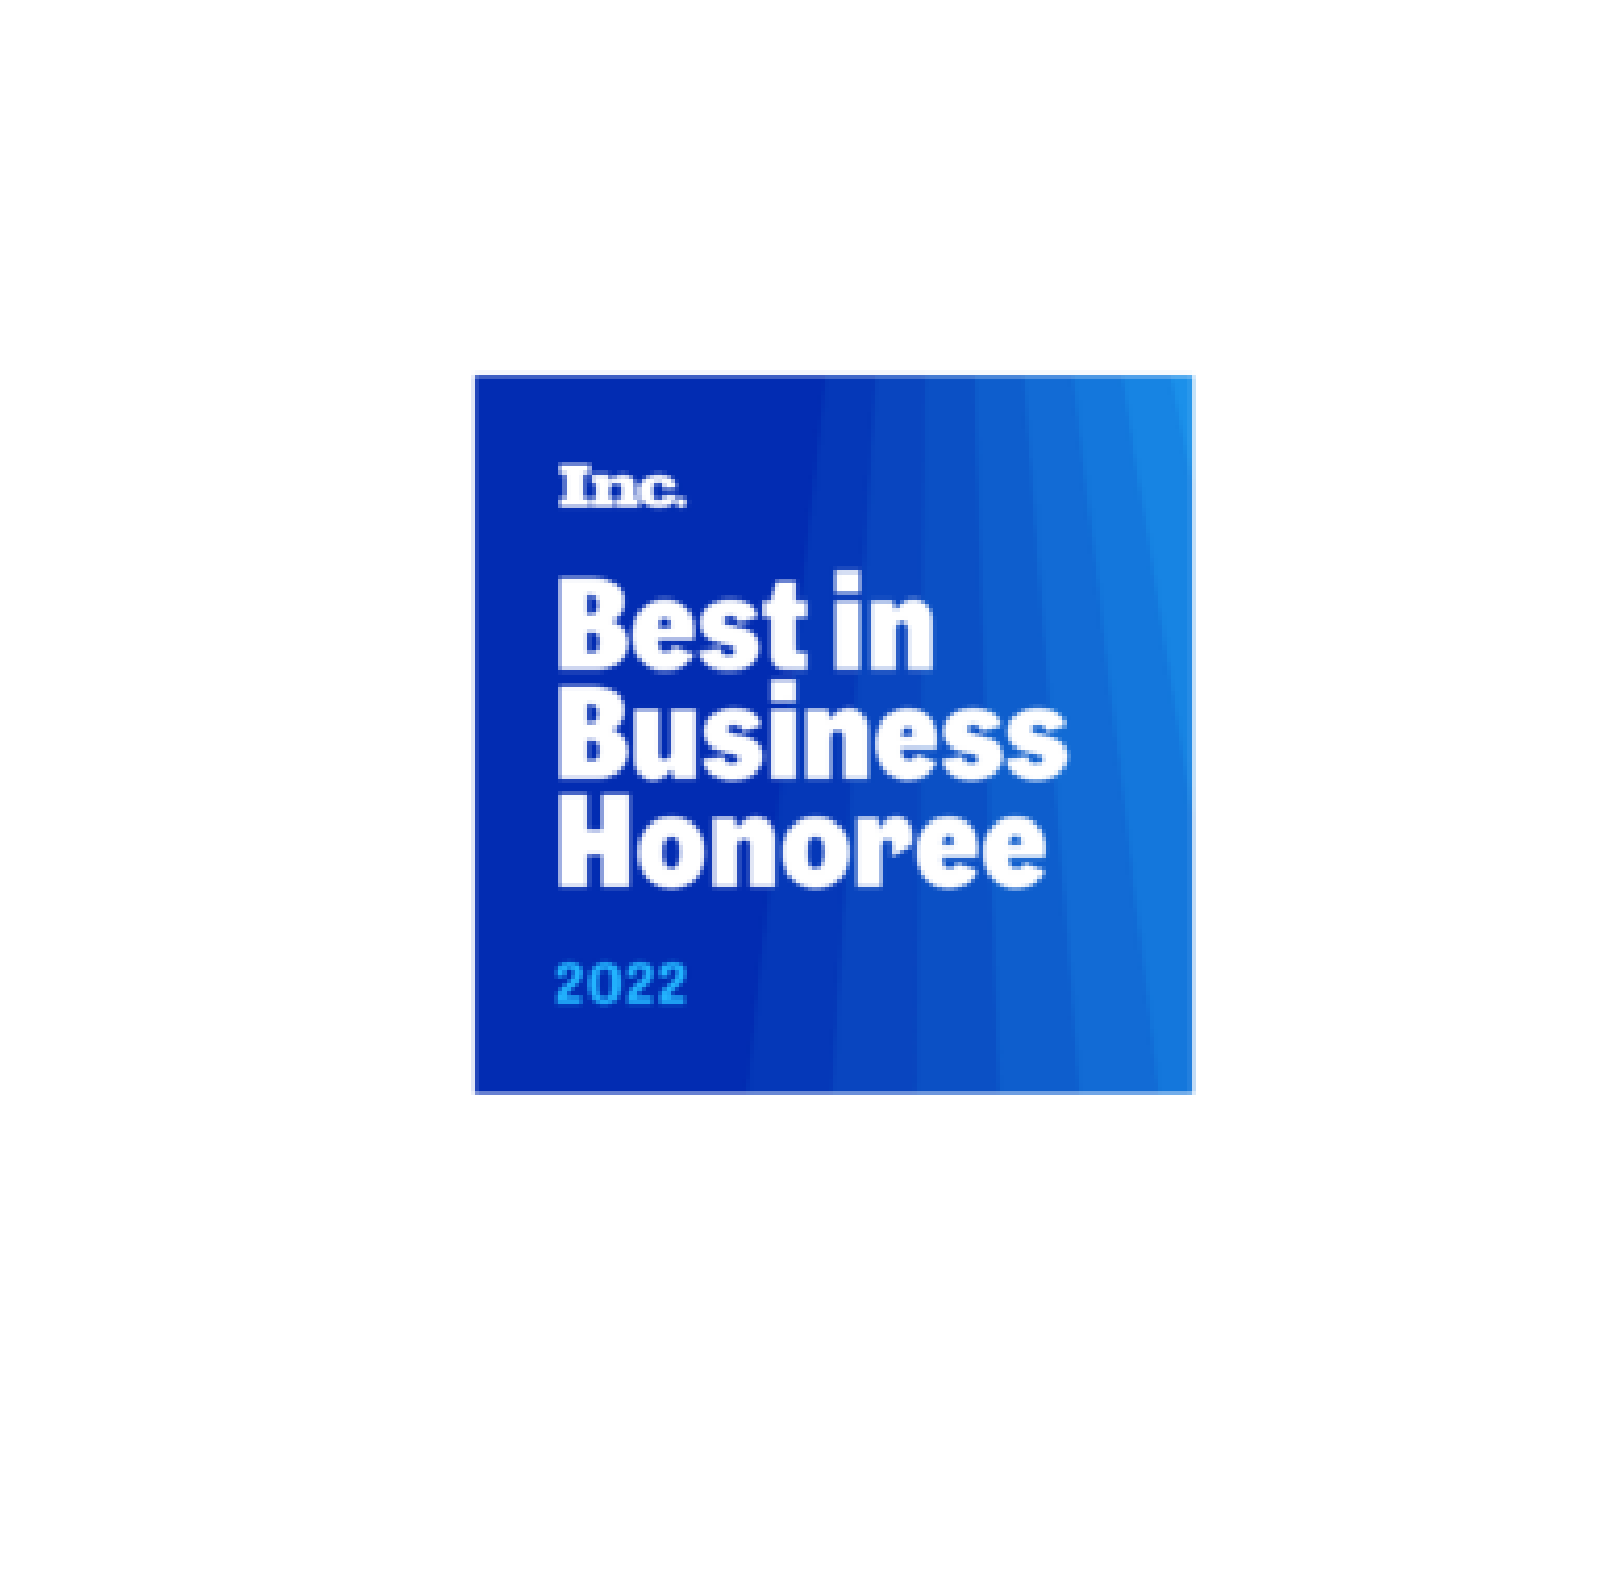 Best in business honoree 2022 award